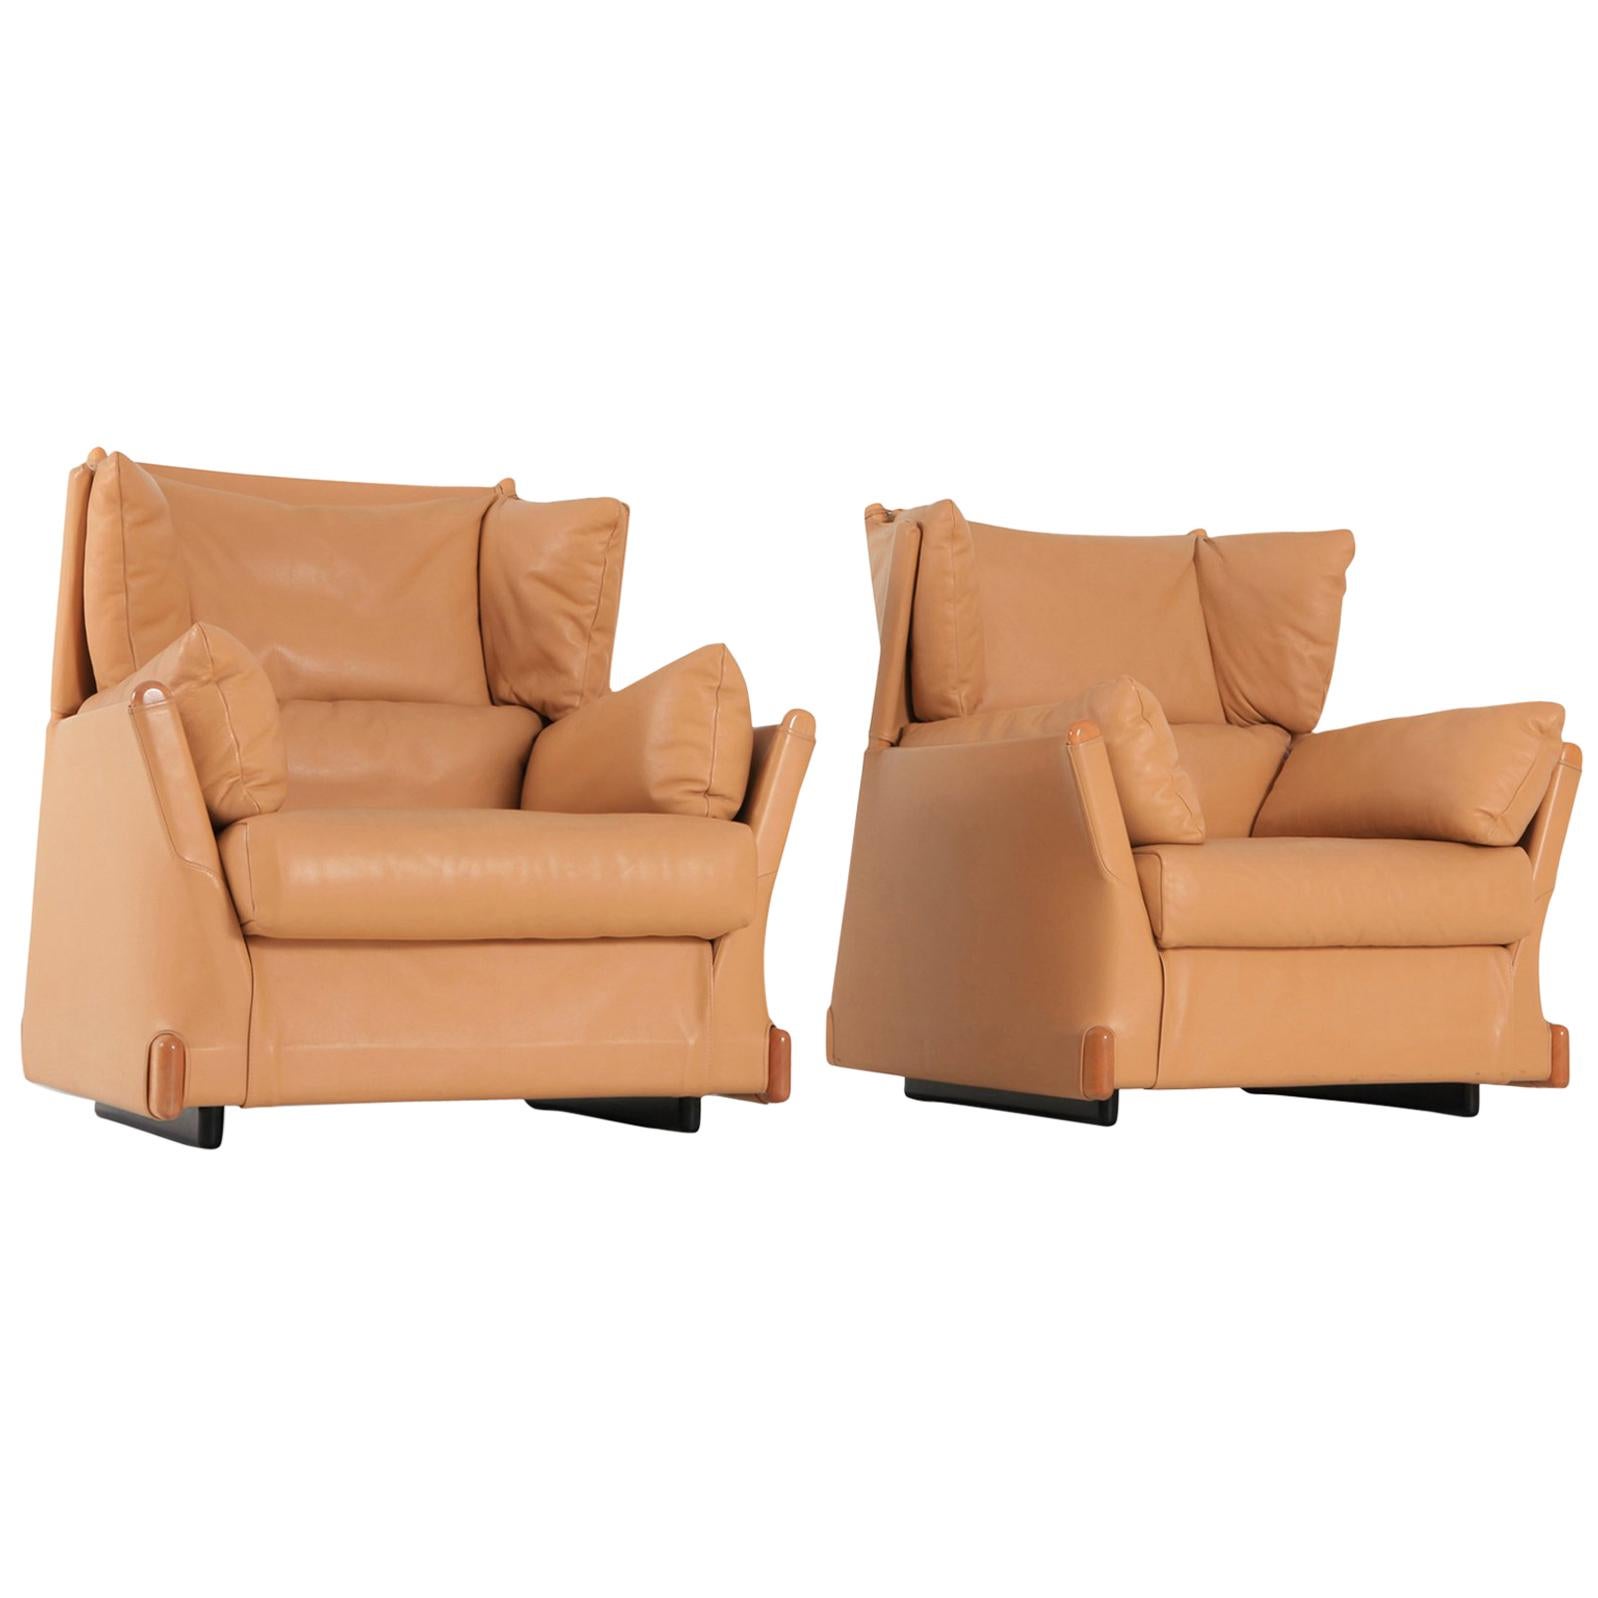 Postmodern luxury lounge chairs, Piero Martini for Cassina, 1970s.
The camel leather and wooden details are in exceptionally well preserved condition.

Down filled cushions make these club chairs very comfortable too.

  